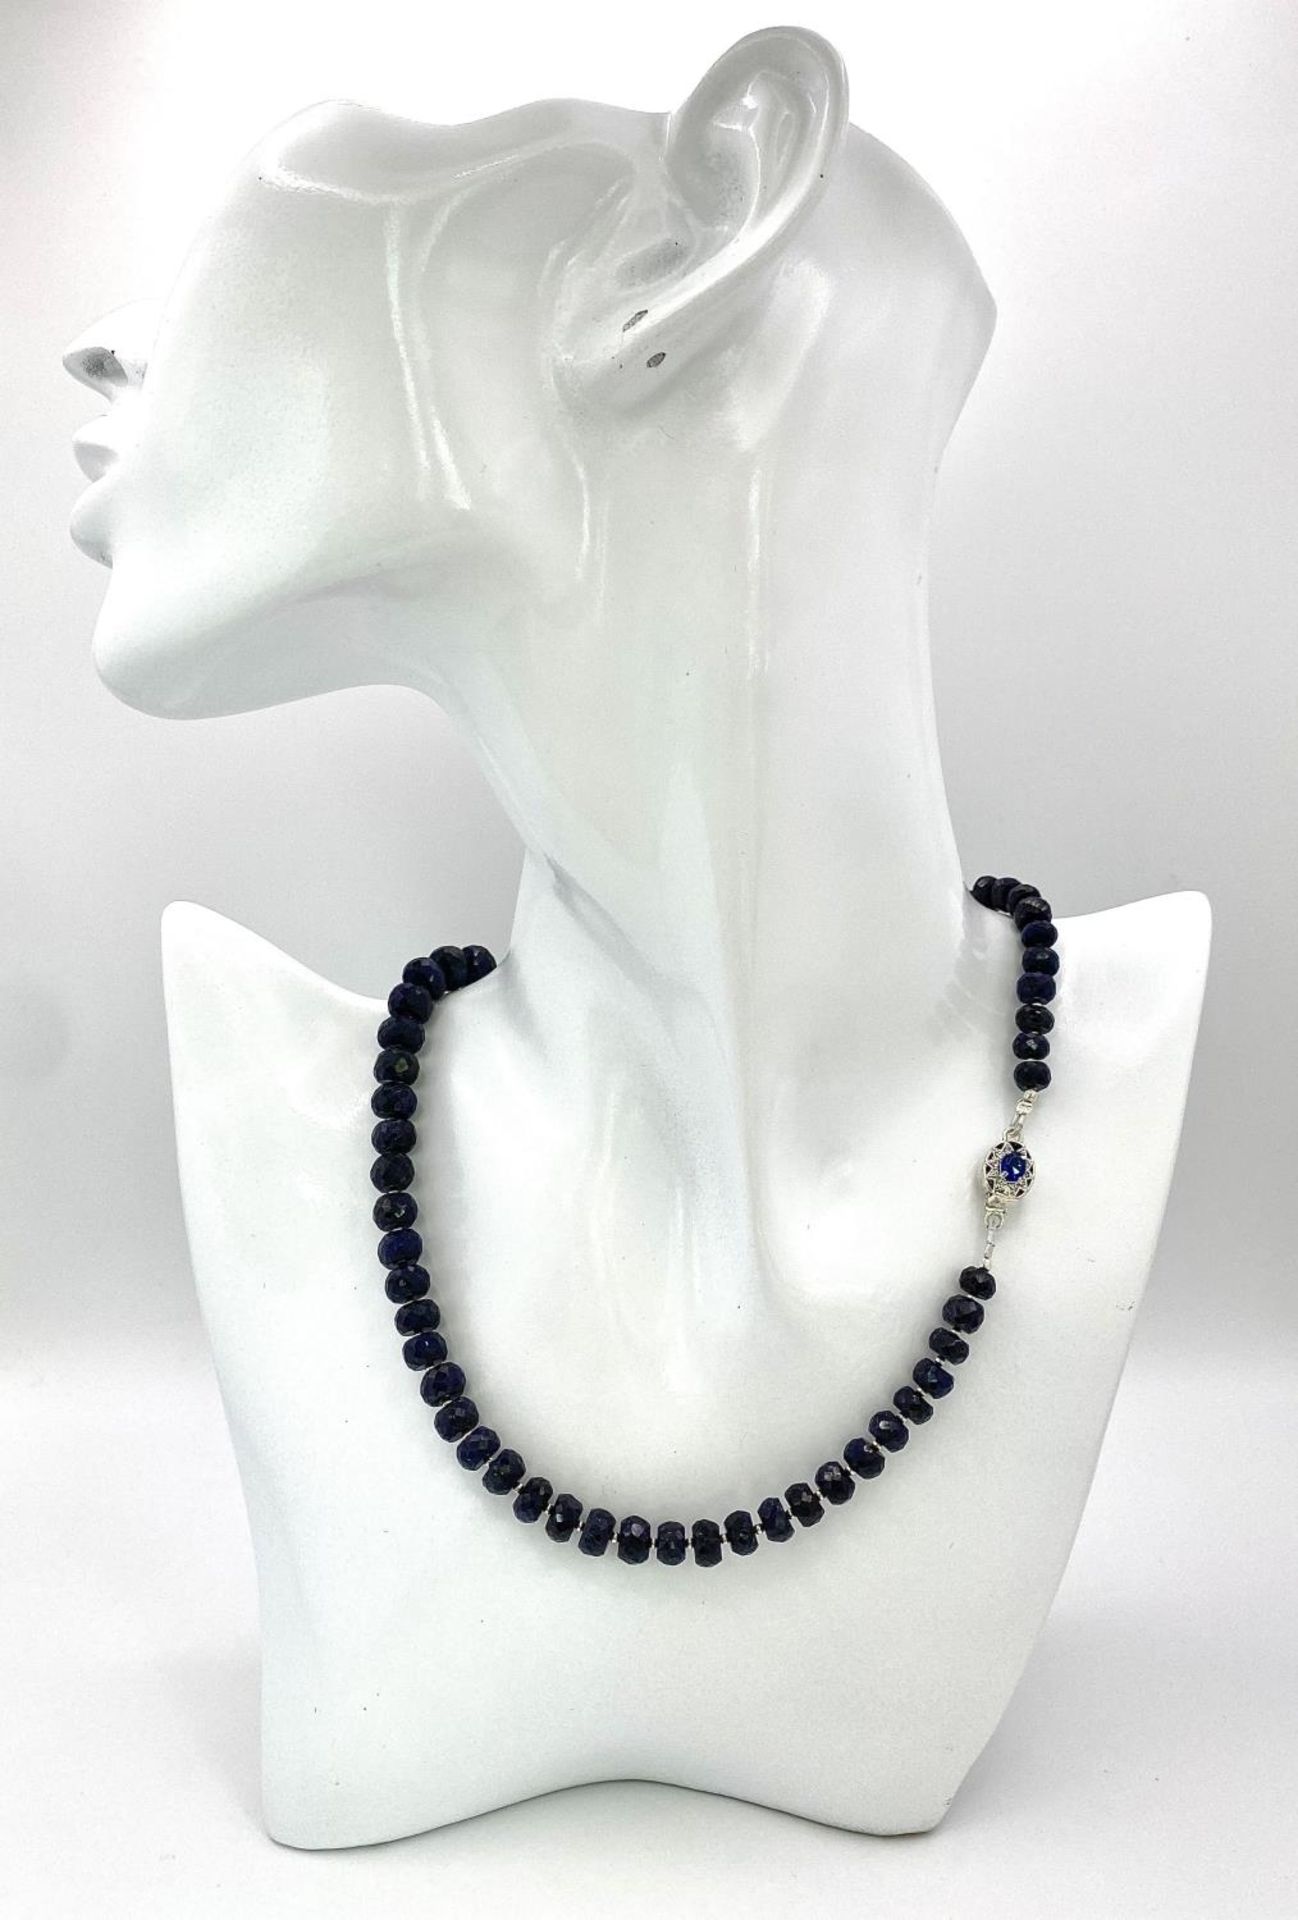 A 250ctw Blue Sapphire Rondelle Single Strand Necklace with Sapphire and 925 Silver Clasp. 42cm